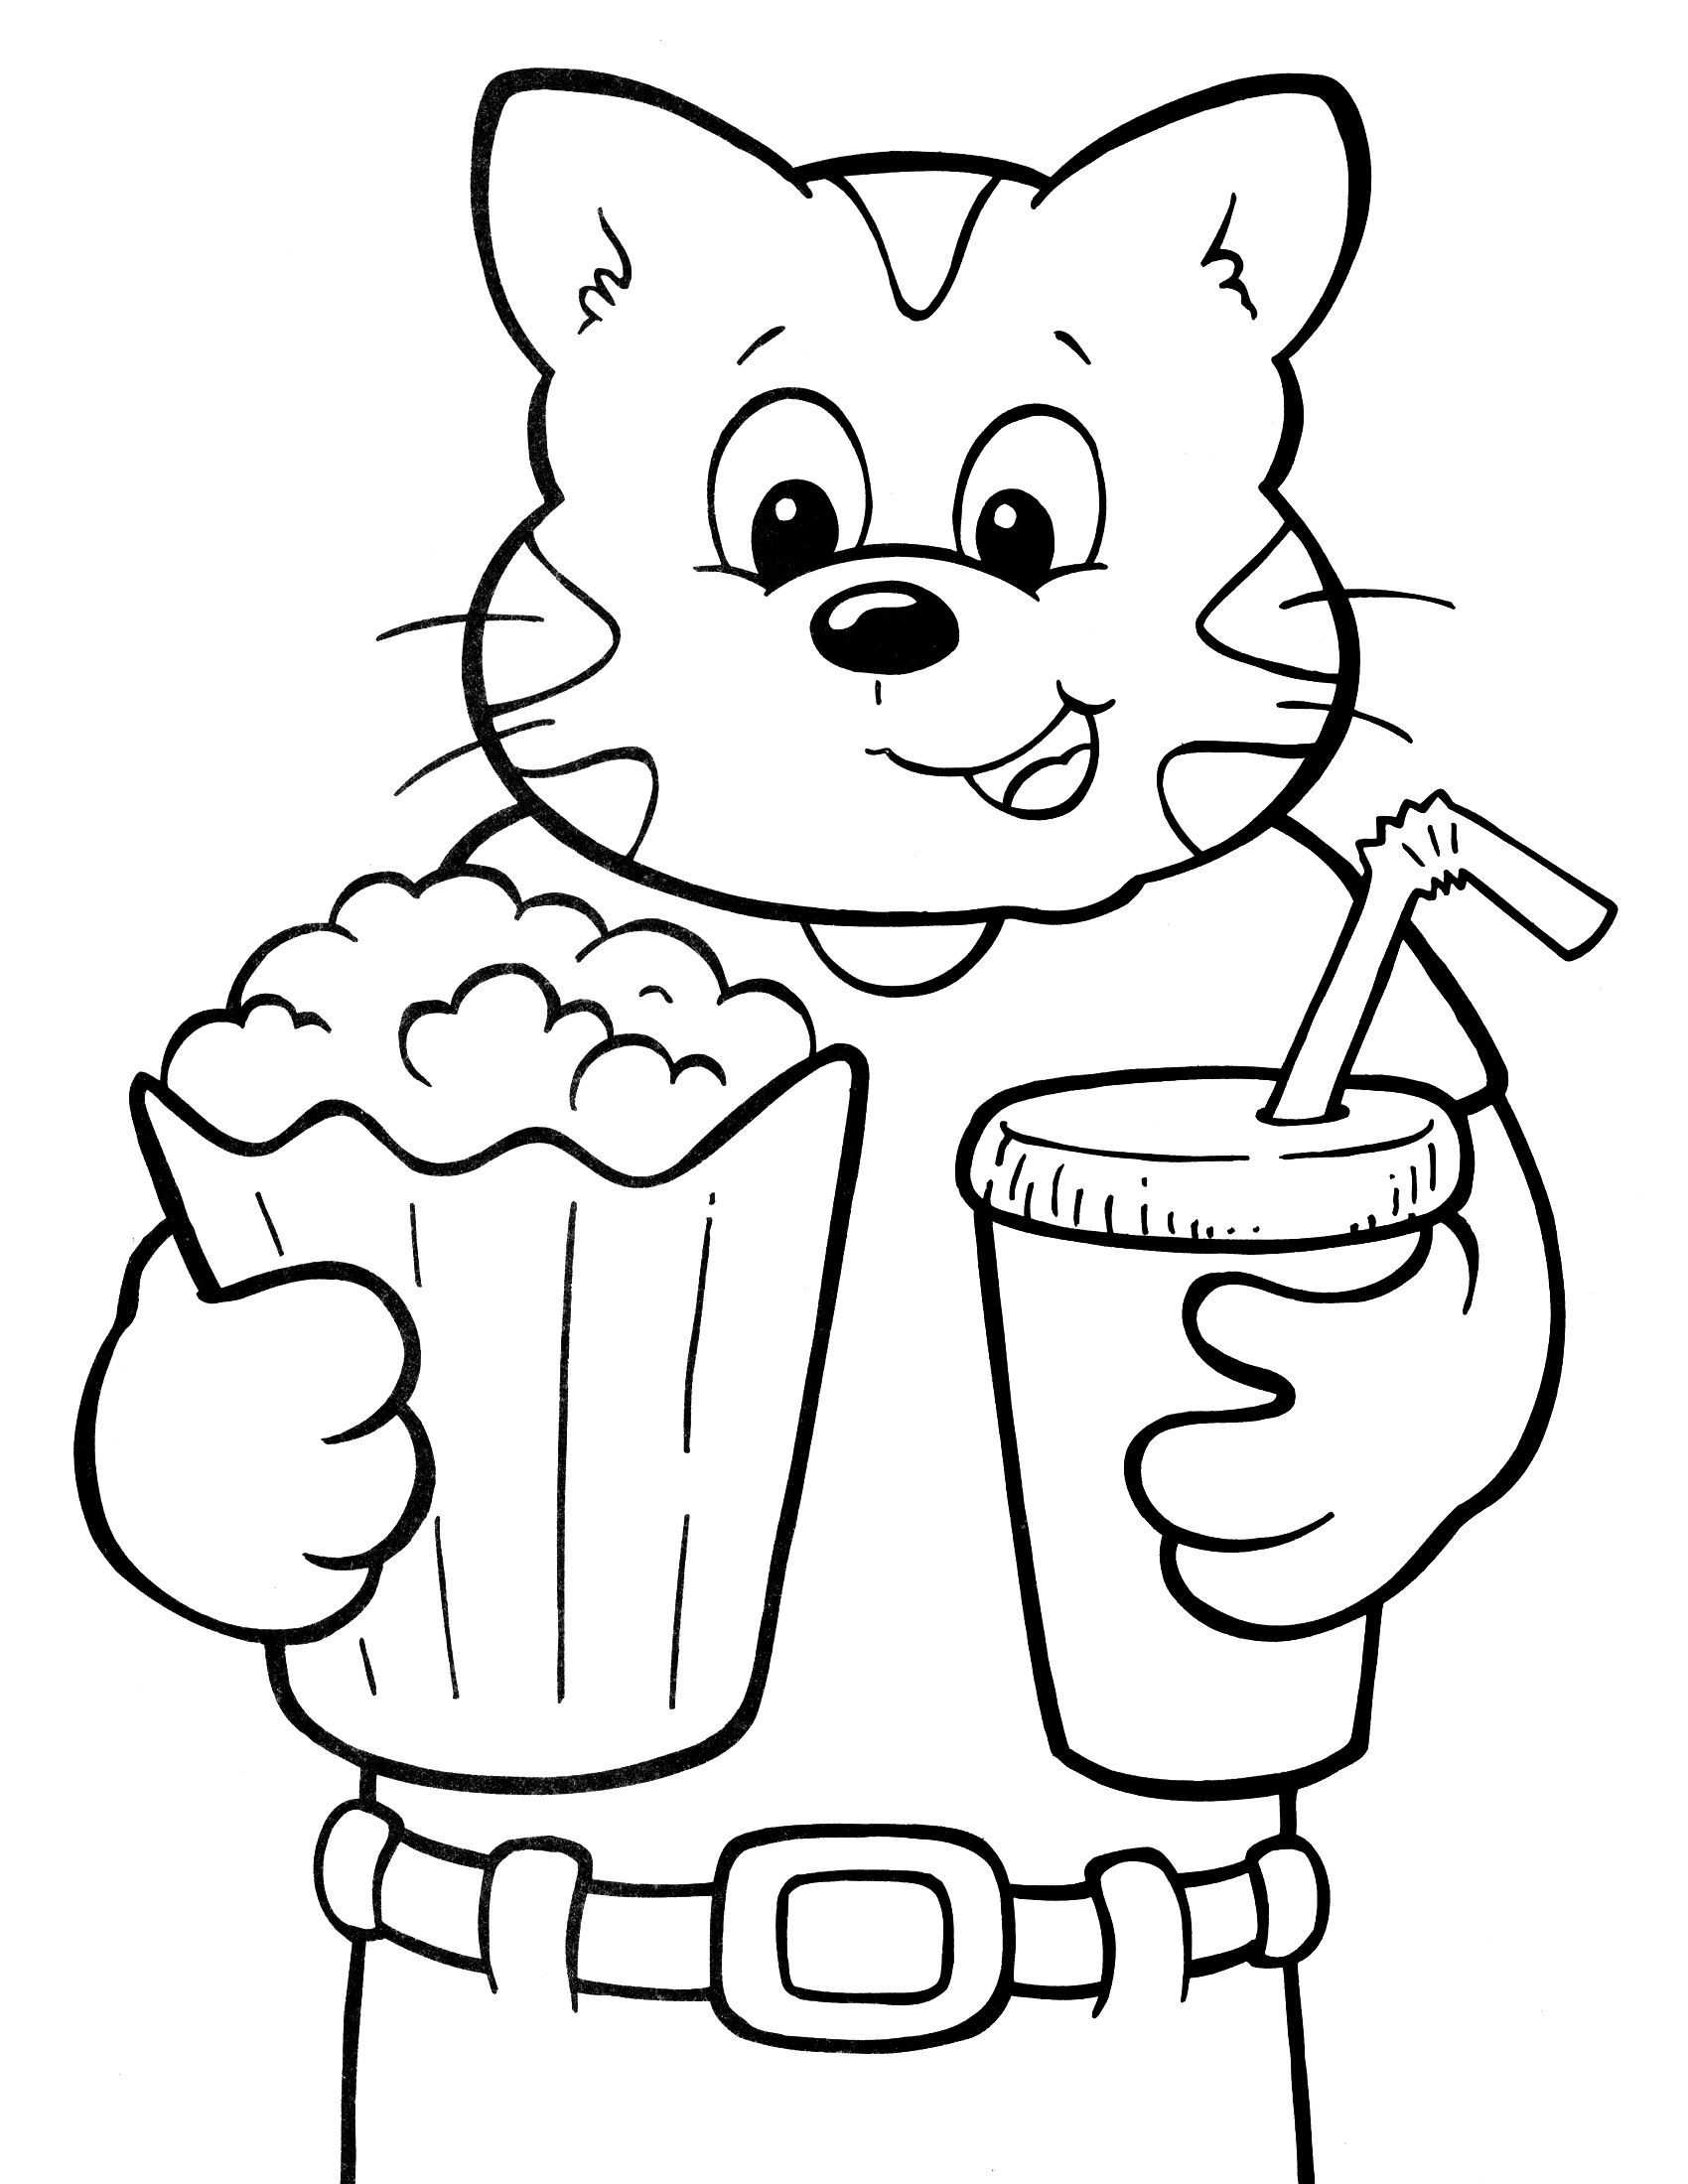 Free Personalized Happy Birthday Coloring Pages